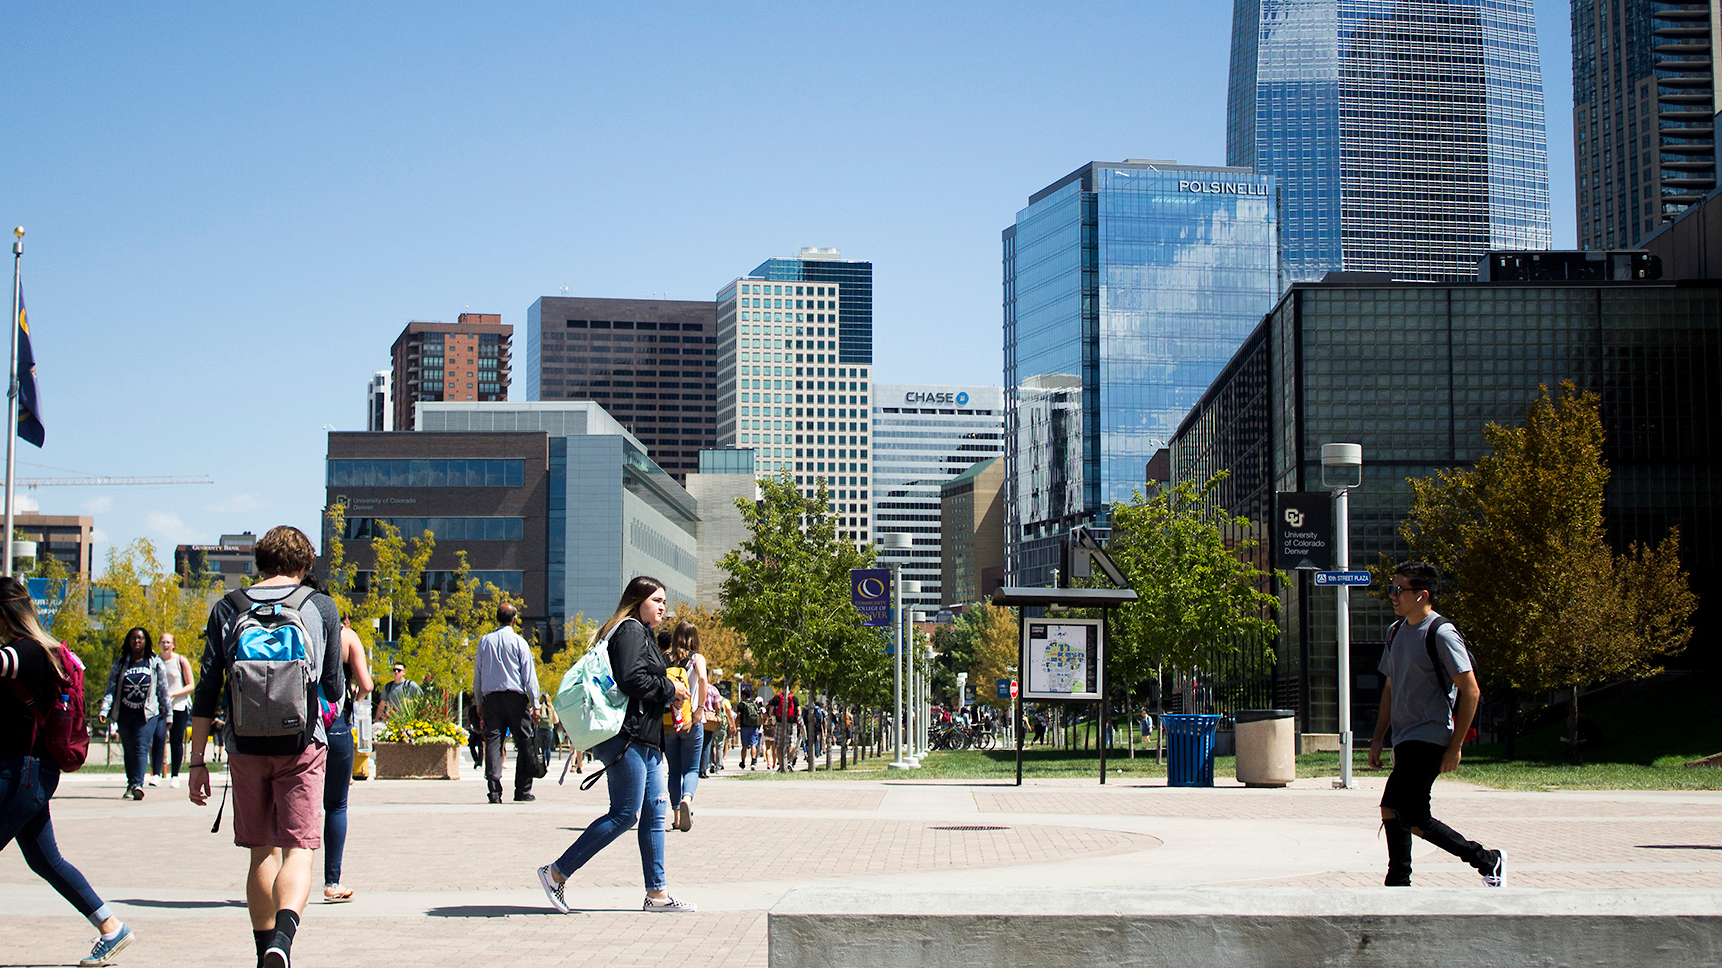 Students walking on campus with denver skyline